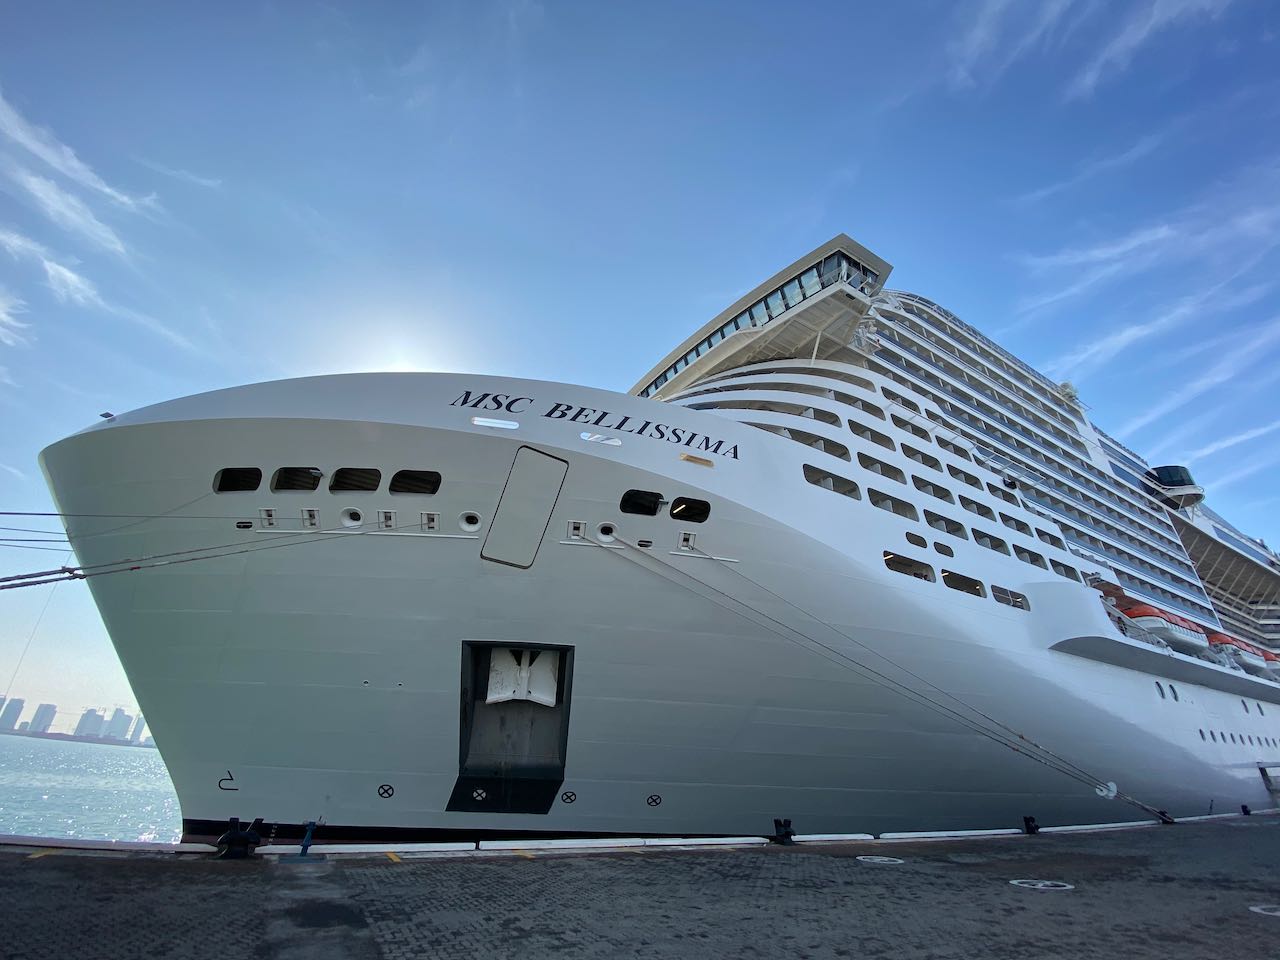 MSC Bellissima: Beautiful ship but a cruise to avoid